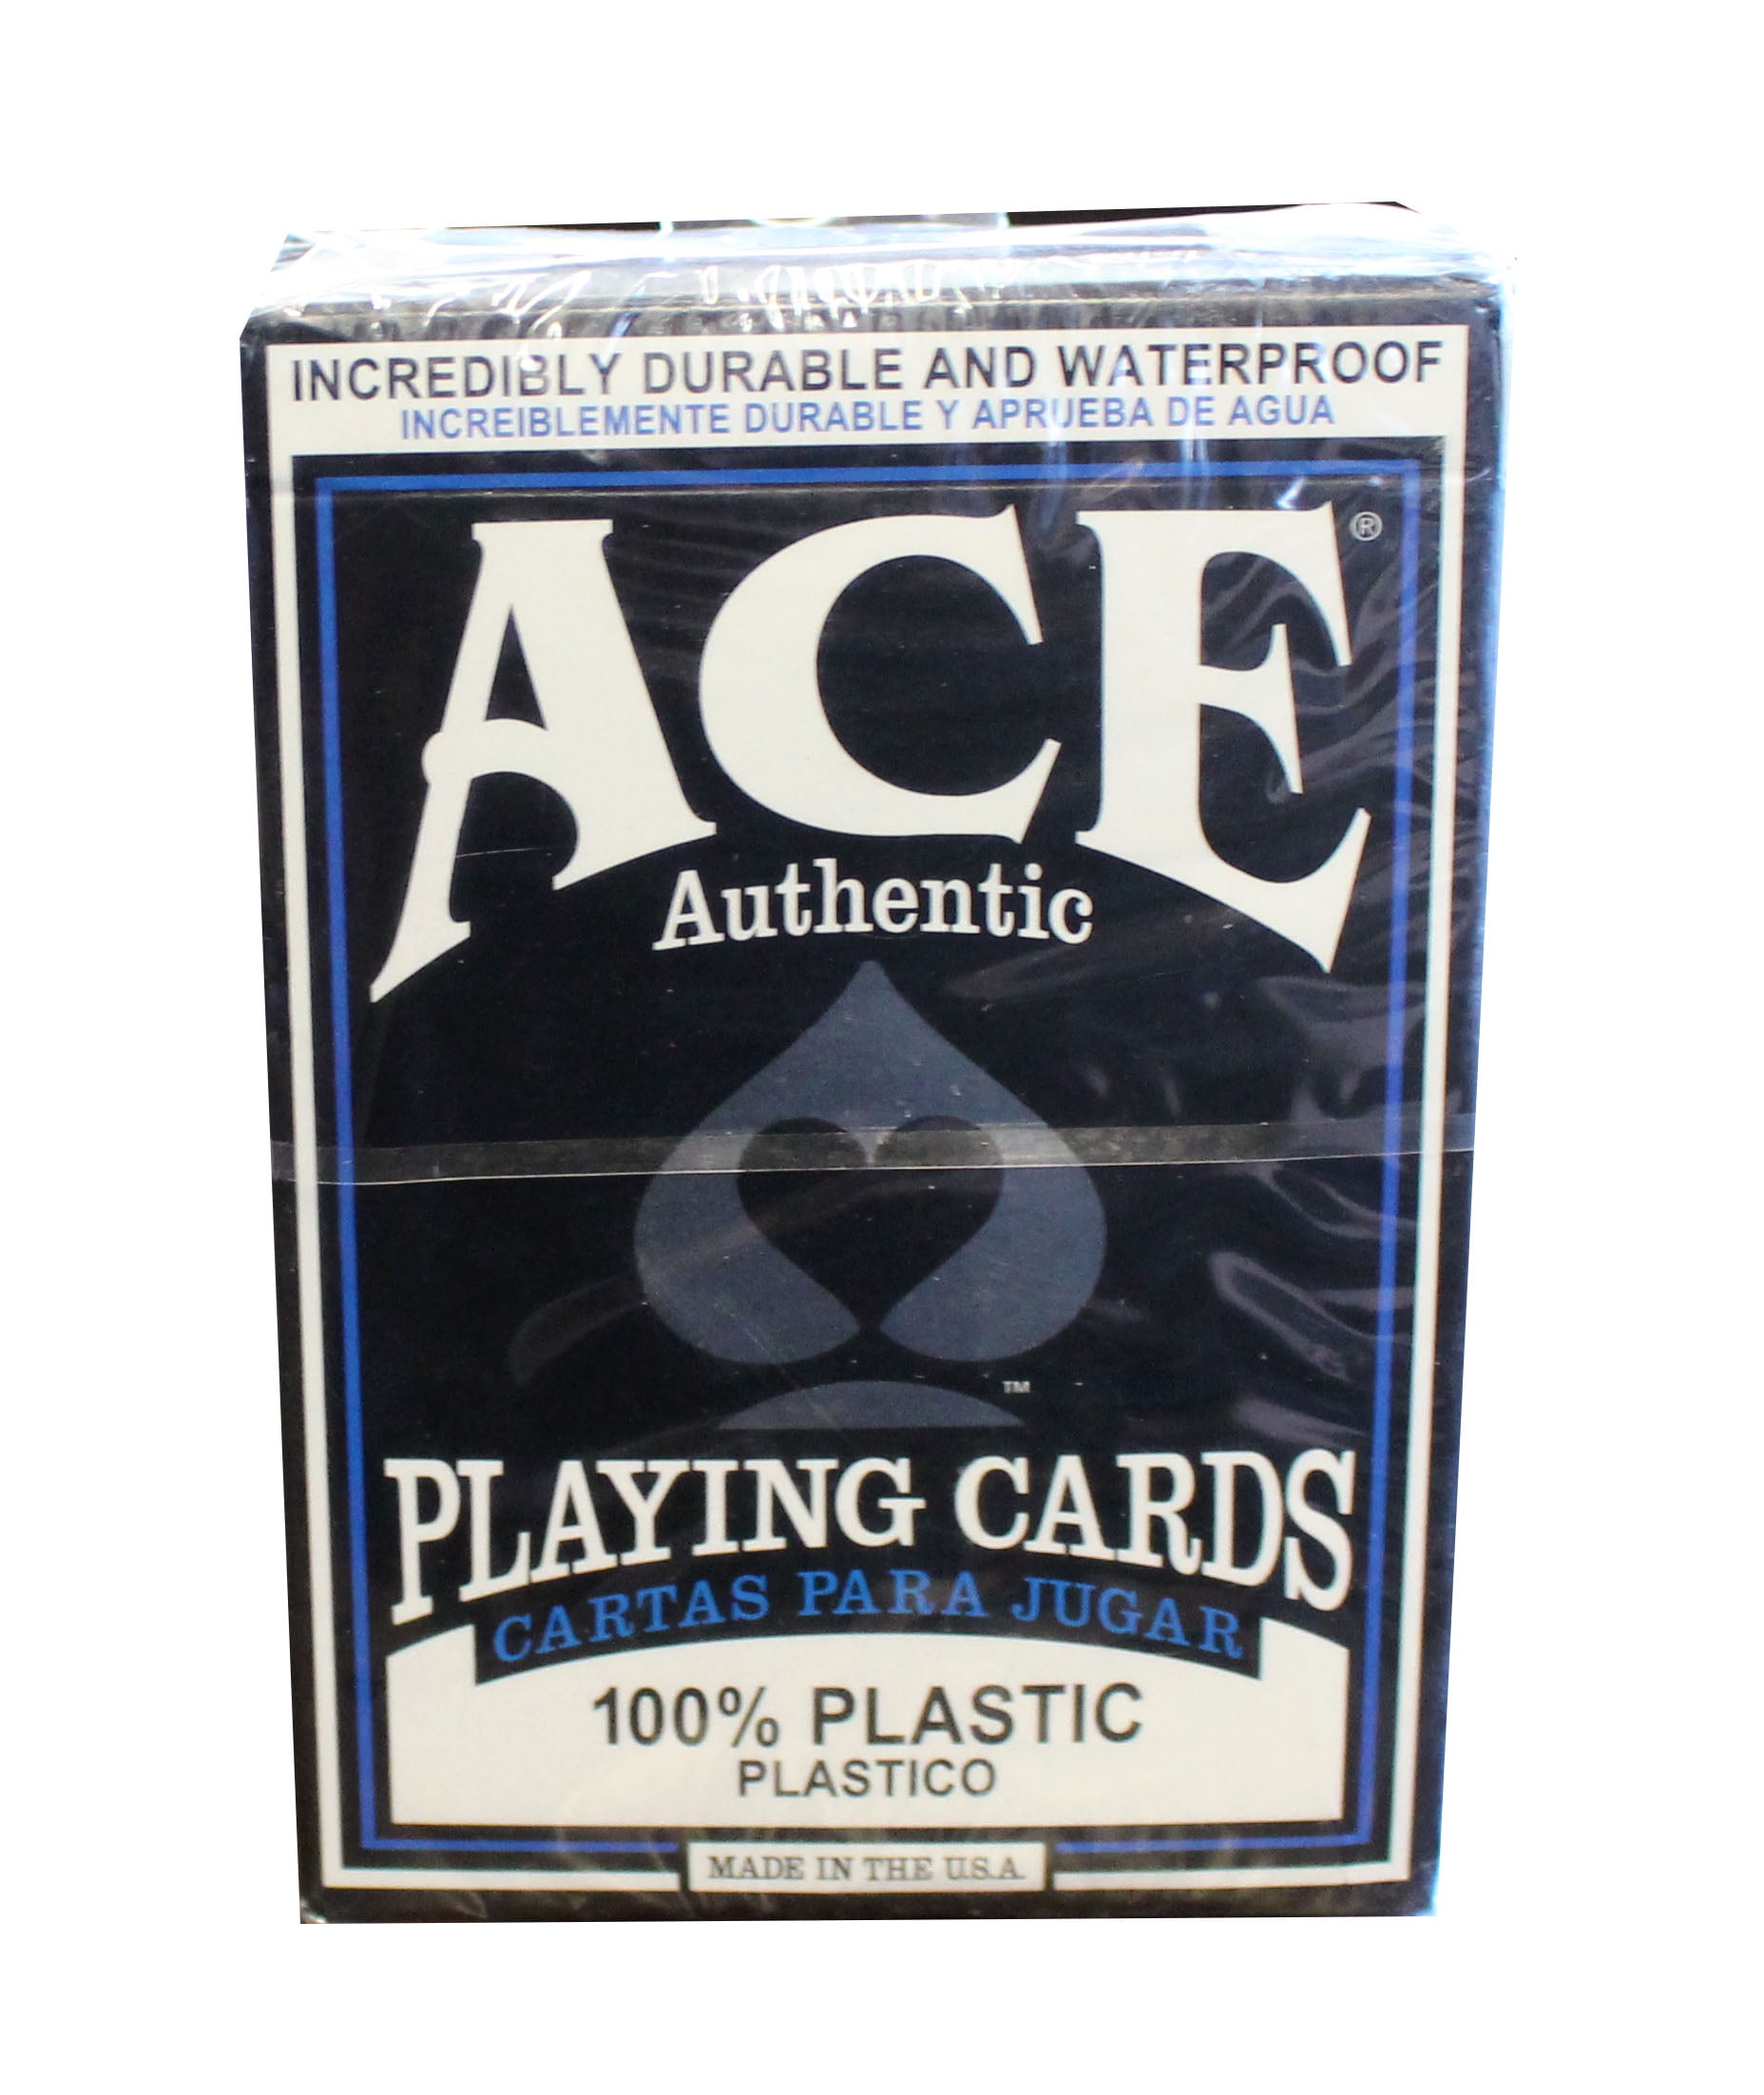 IC00008761 'Ace Playing Cards' Plastic Ice Scraper 